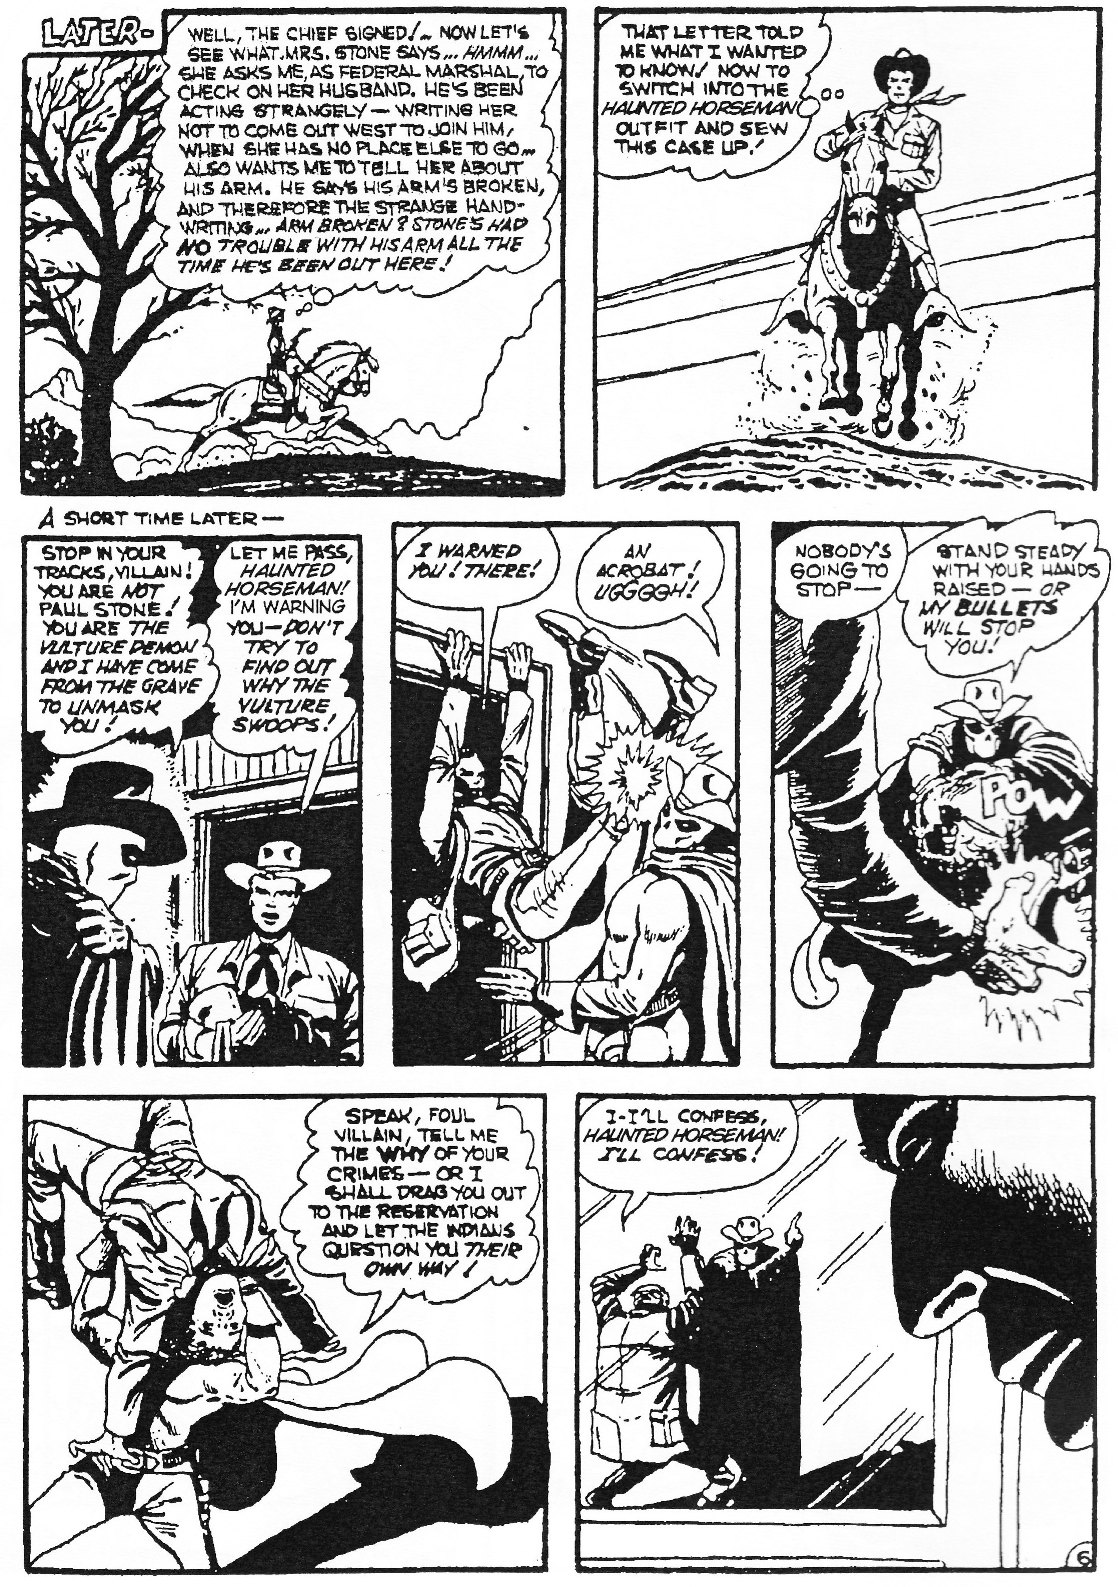 Best of the West (1998) issue 46 - Page 8